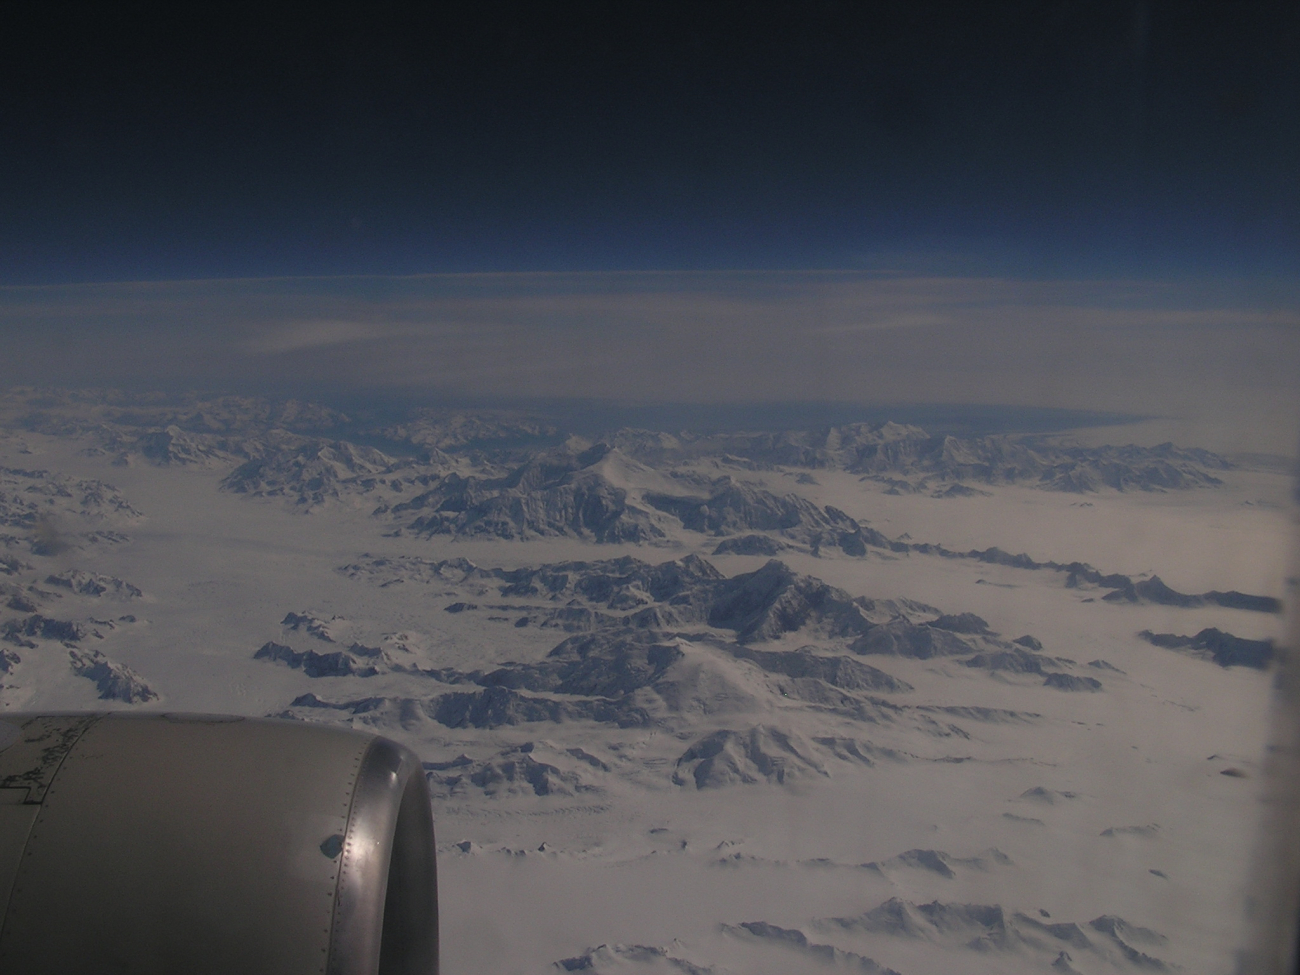 View of Alaska coastal mountains from an airplane